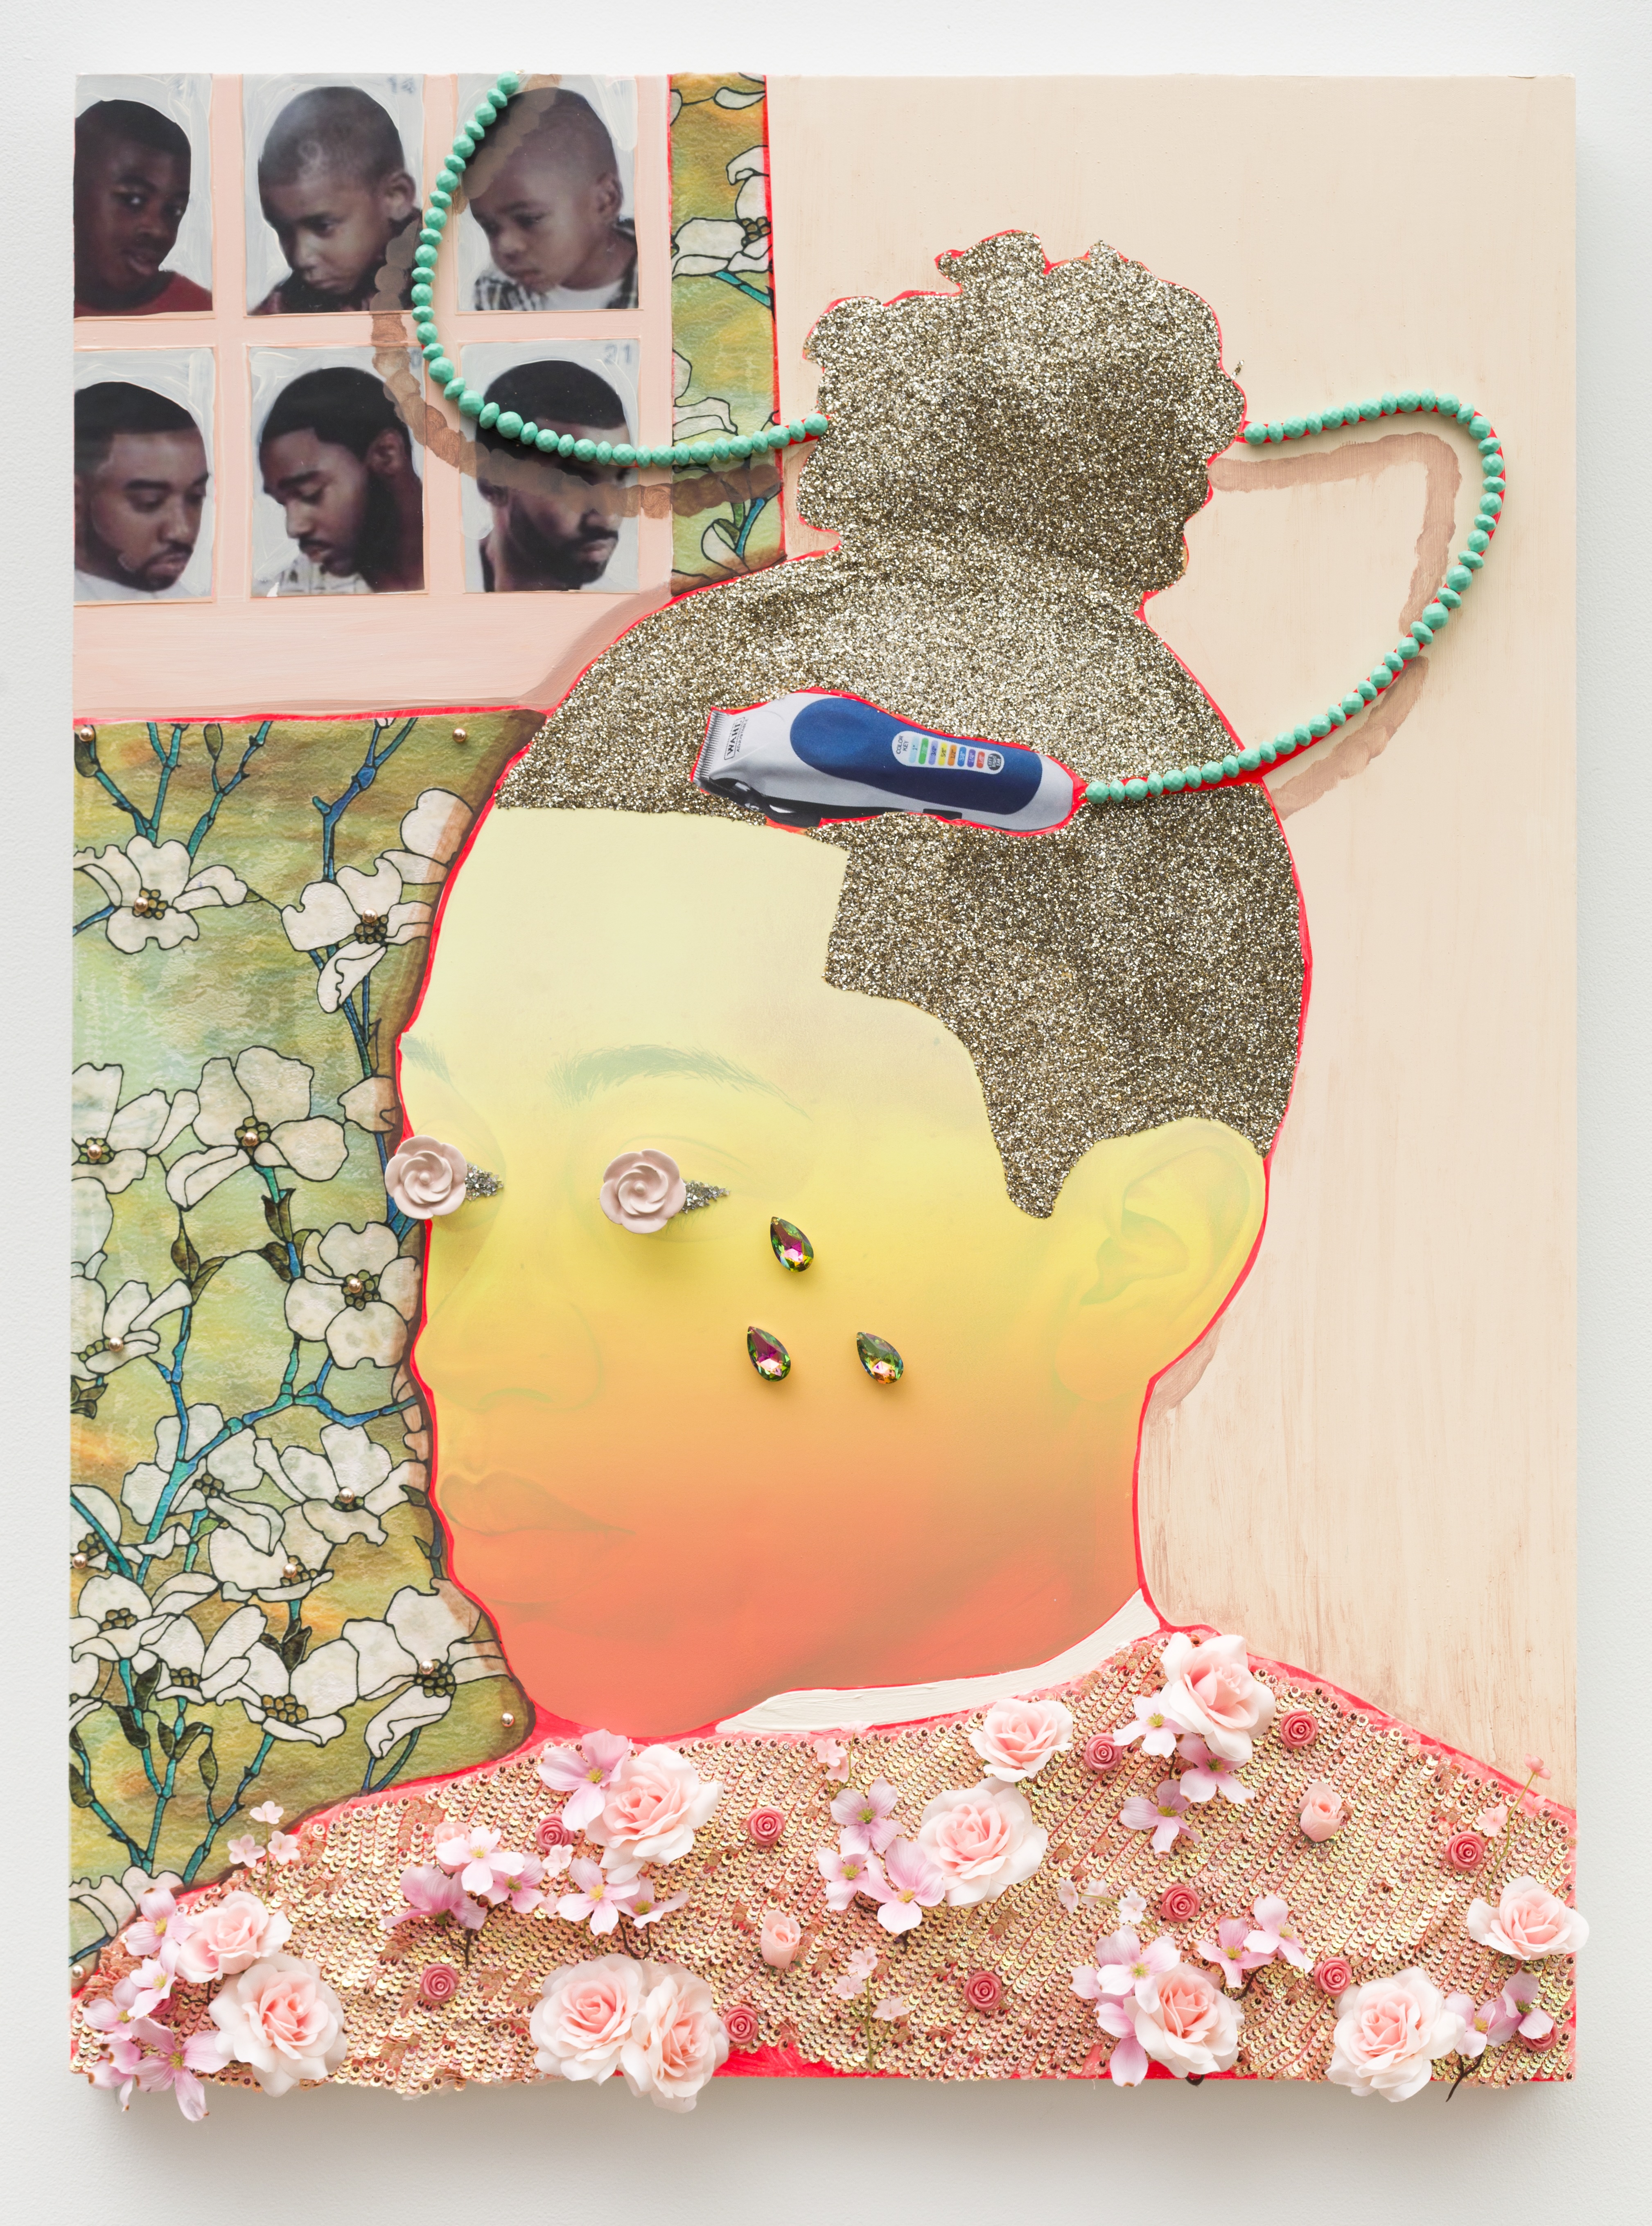 Devan Shimoyama b. 1989, Philadelphia, Pennsylvania; active in Pittsburgh, Pennsylvania Tasha 2018 Colored pencil, oil, collage, sequins, glitter, silk flowers, beads, and Flashe (vinyl emulsion paint) on canvas stretched over panel 48 x 36 in. Collection Pérez Art Museum Miami, m useum purchase with funds provided by PAMM’s Collectors Council, with additional funding provided by Craig Robins , c ourtesy of Pérez Art Museum Miami , © Devan Shimoyama